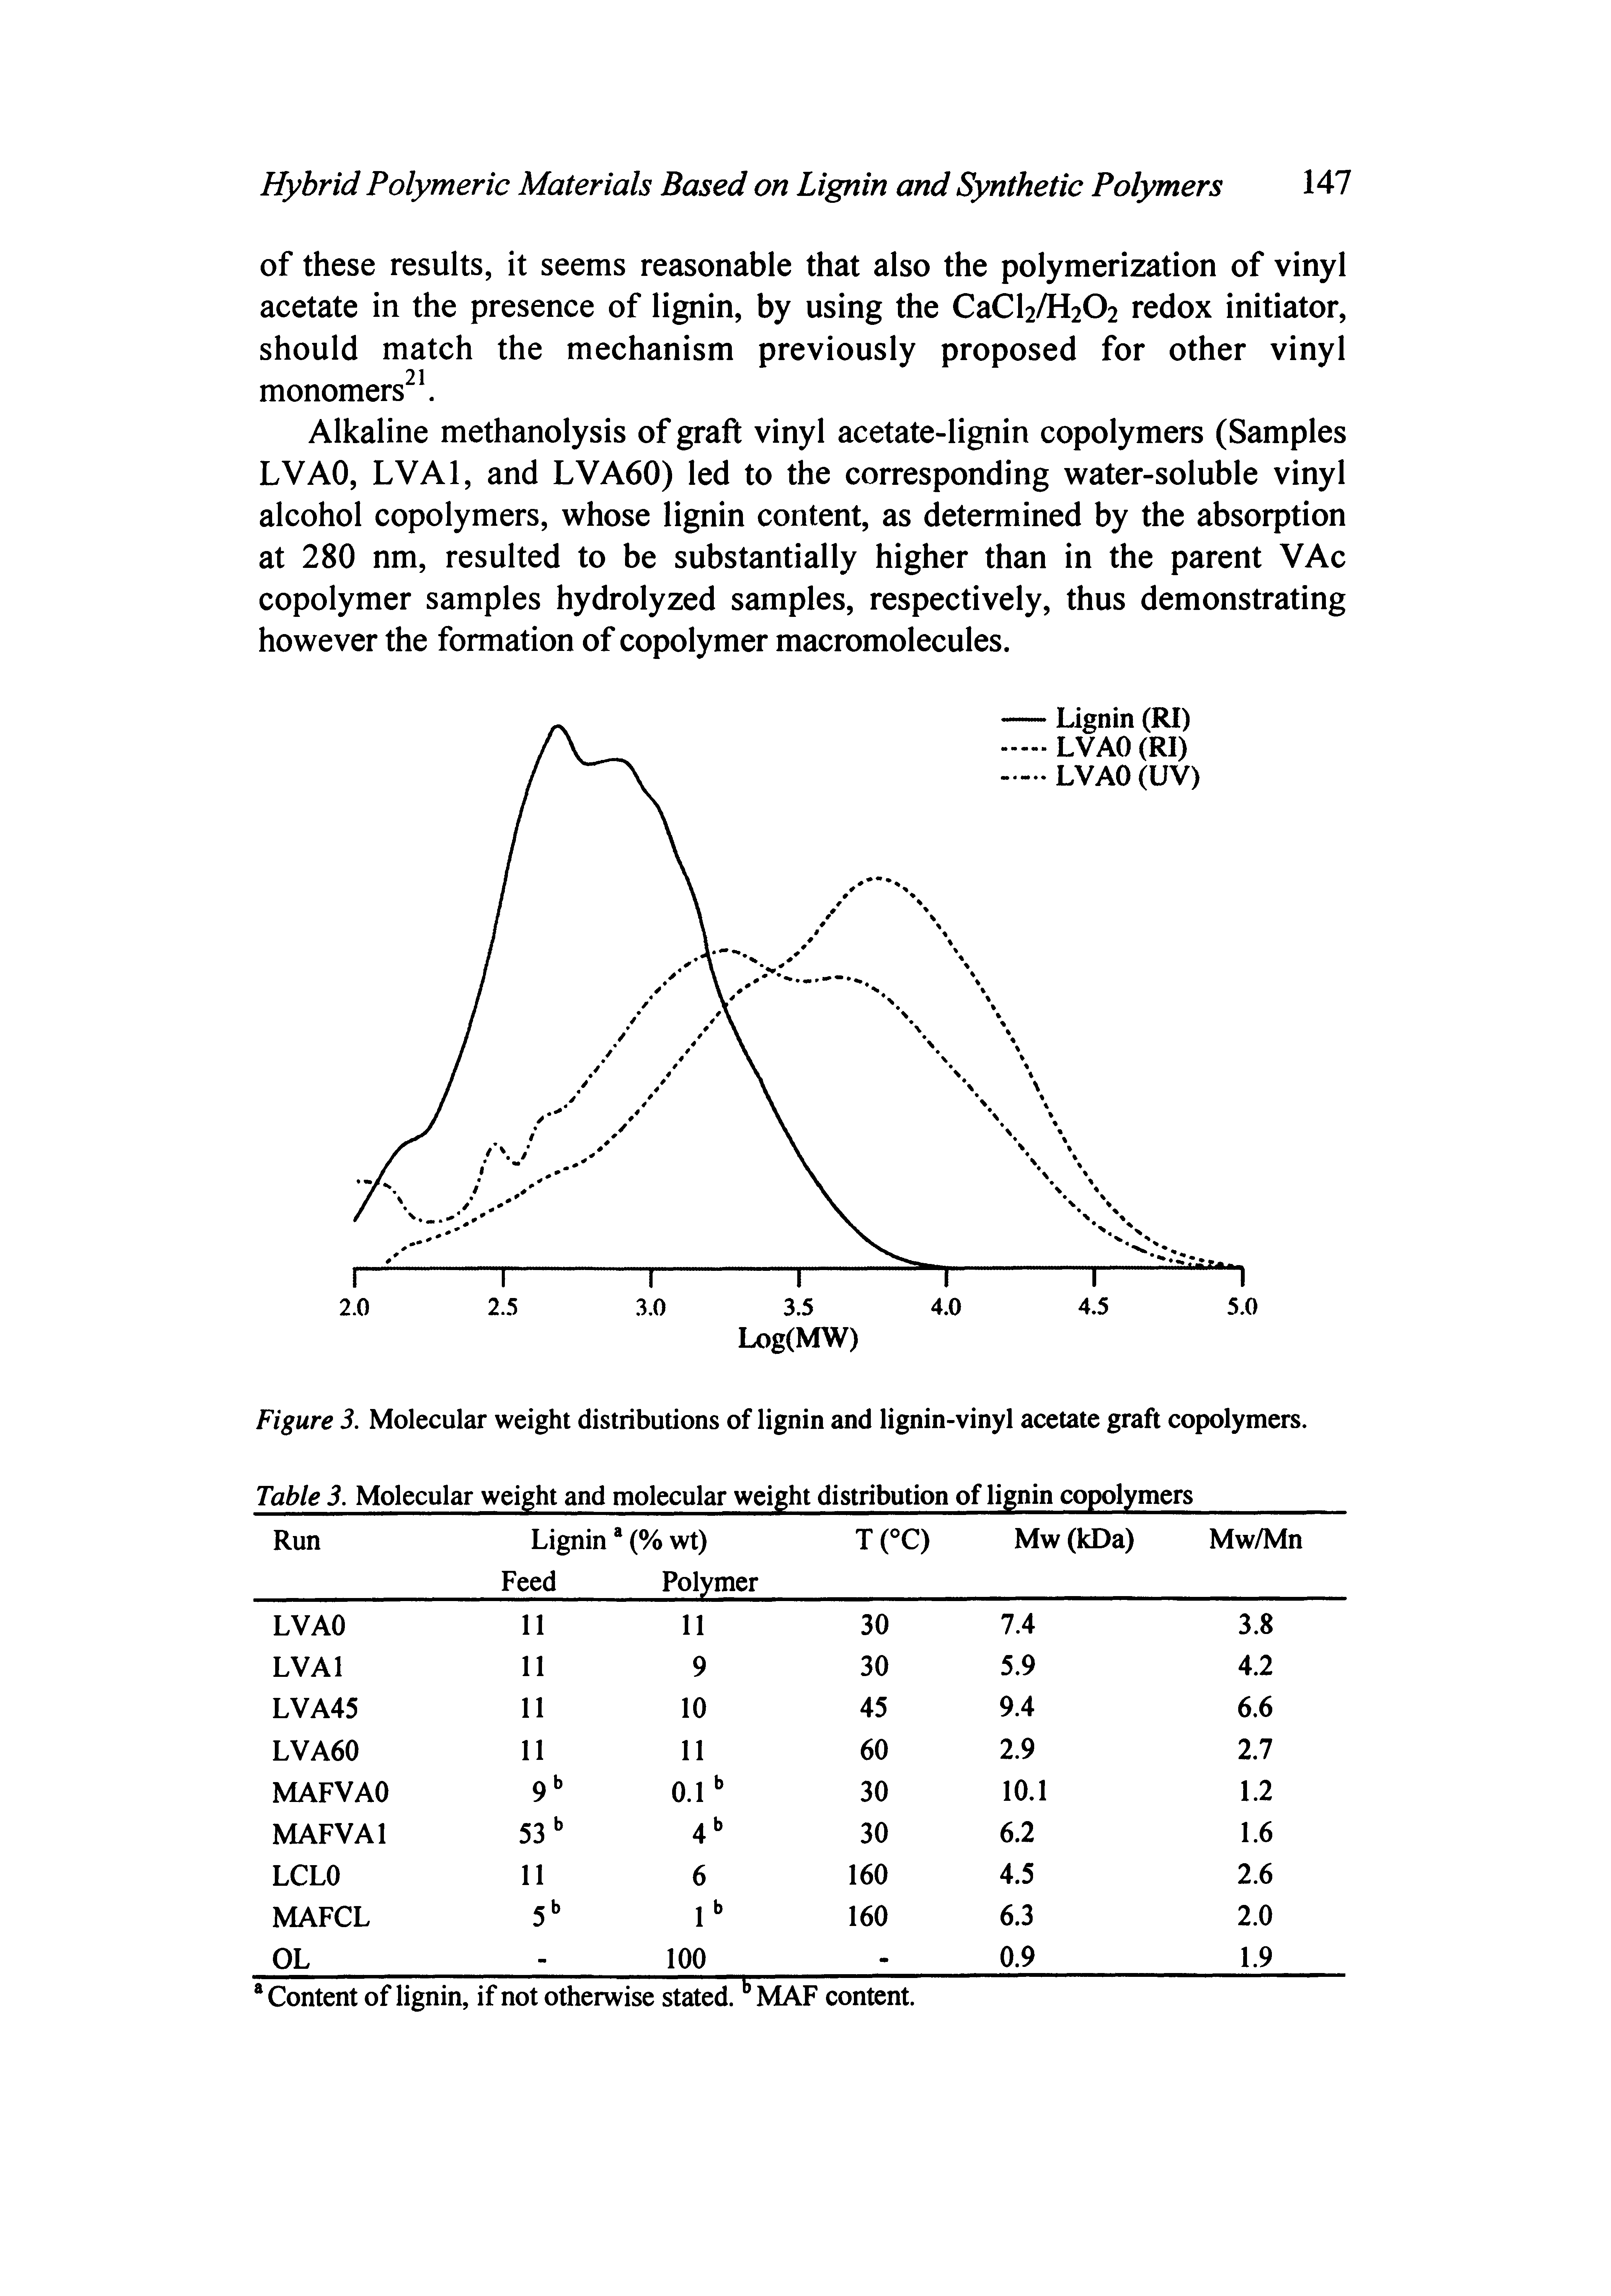 Figure 3. Molecular weight distributions of lignin and lignin-vinyl acetate graft copolymers.